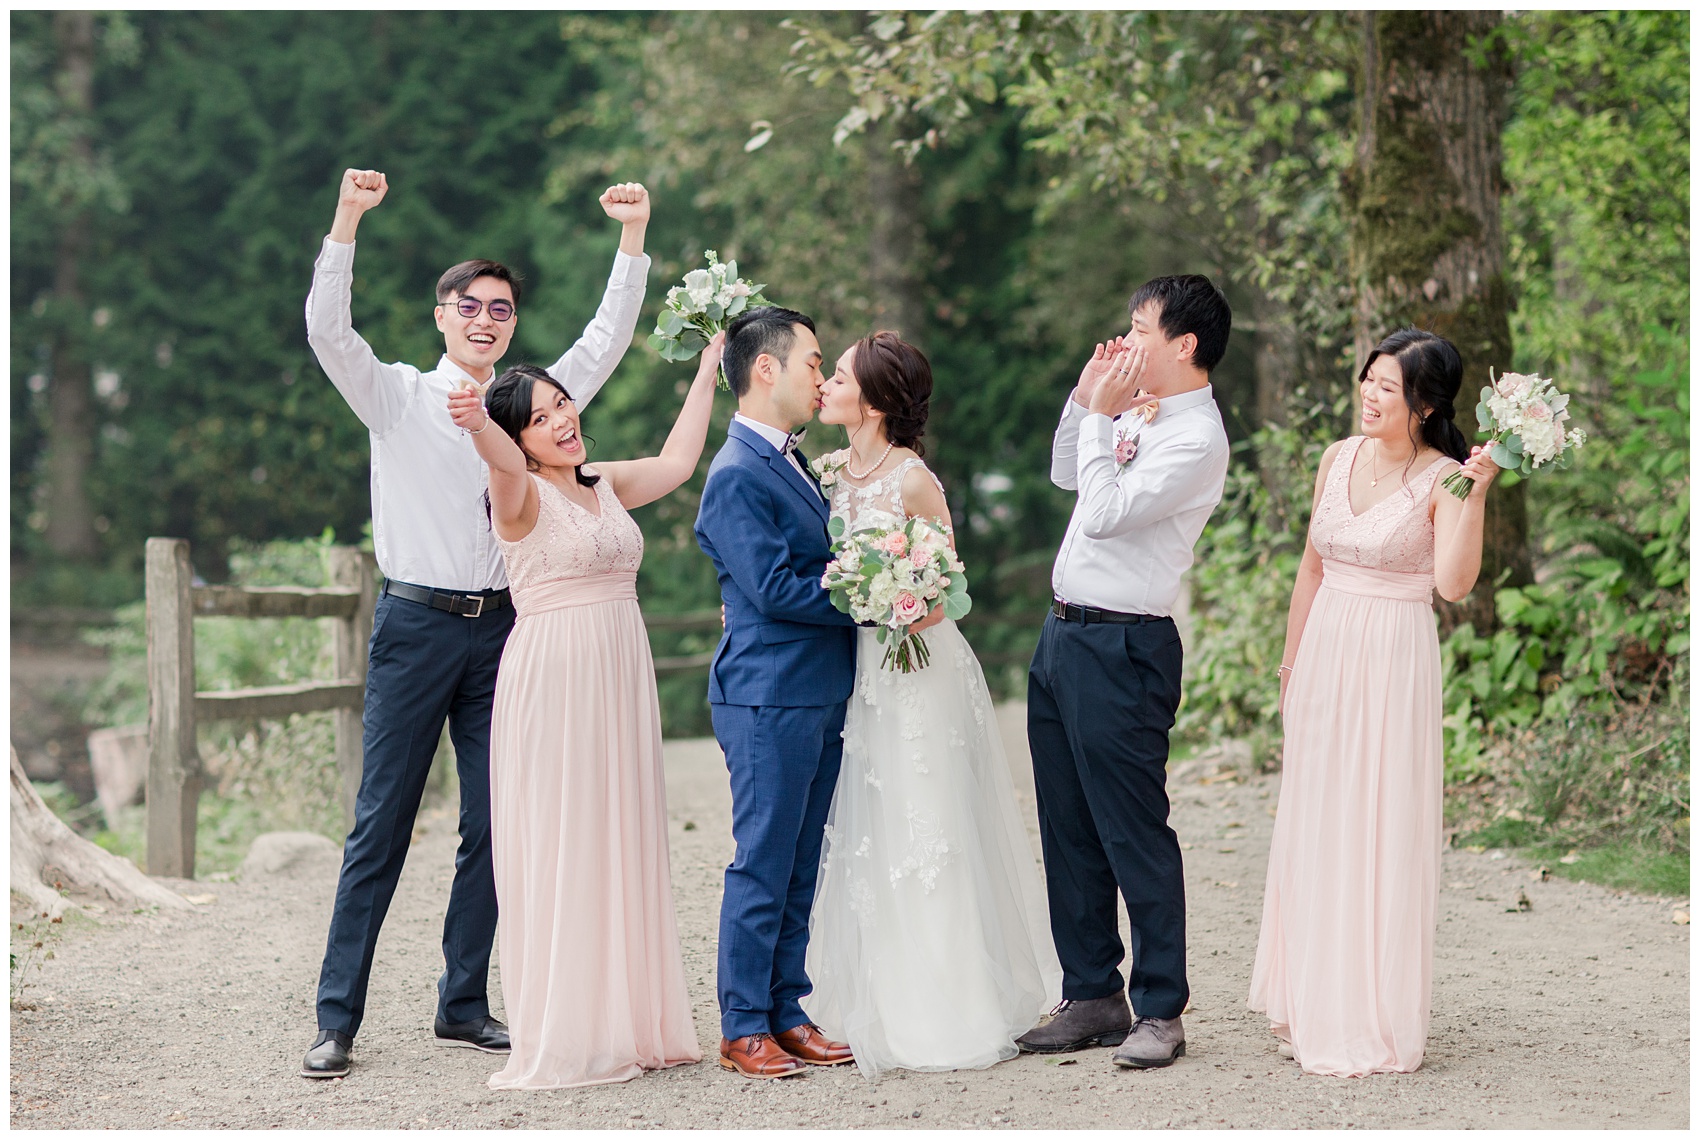 Lafarge Lake Wedding Bridal Party and family group photos, cheering for bride and groom